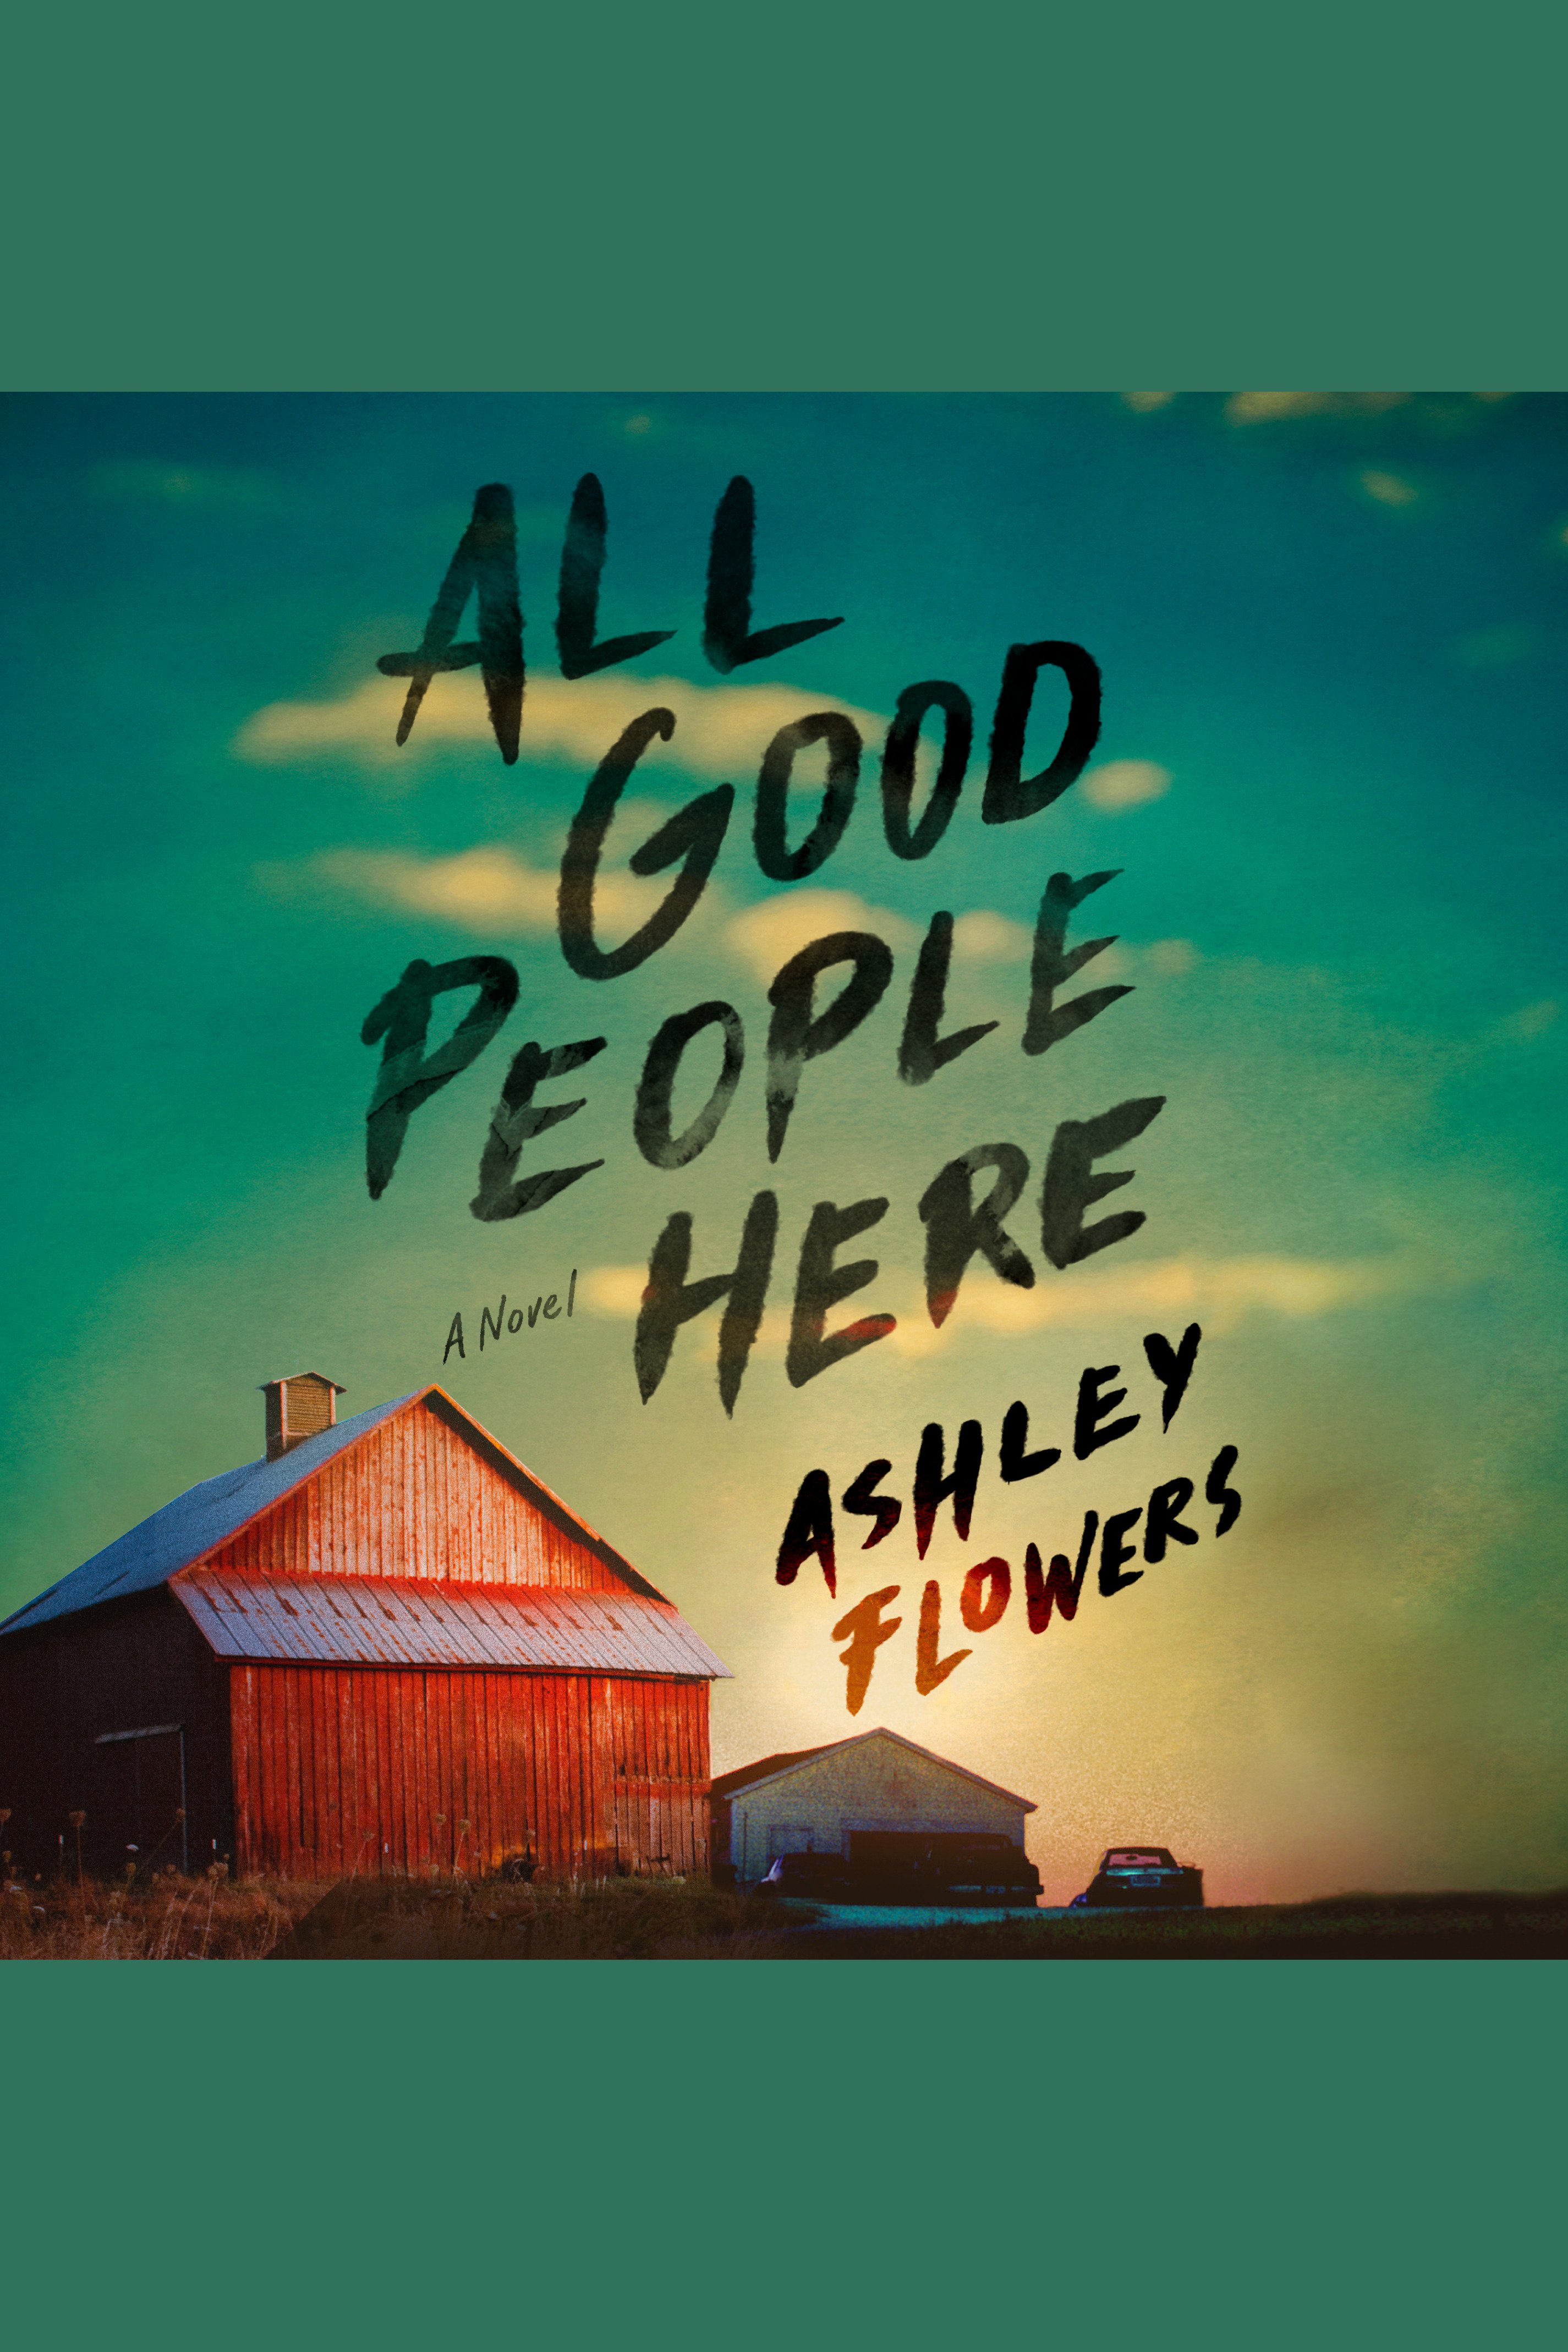 All Good People Here A Novel